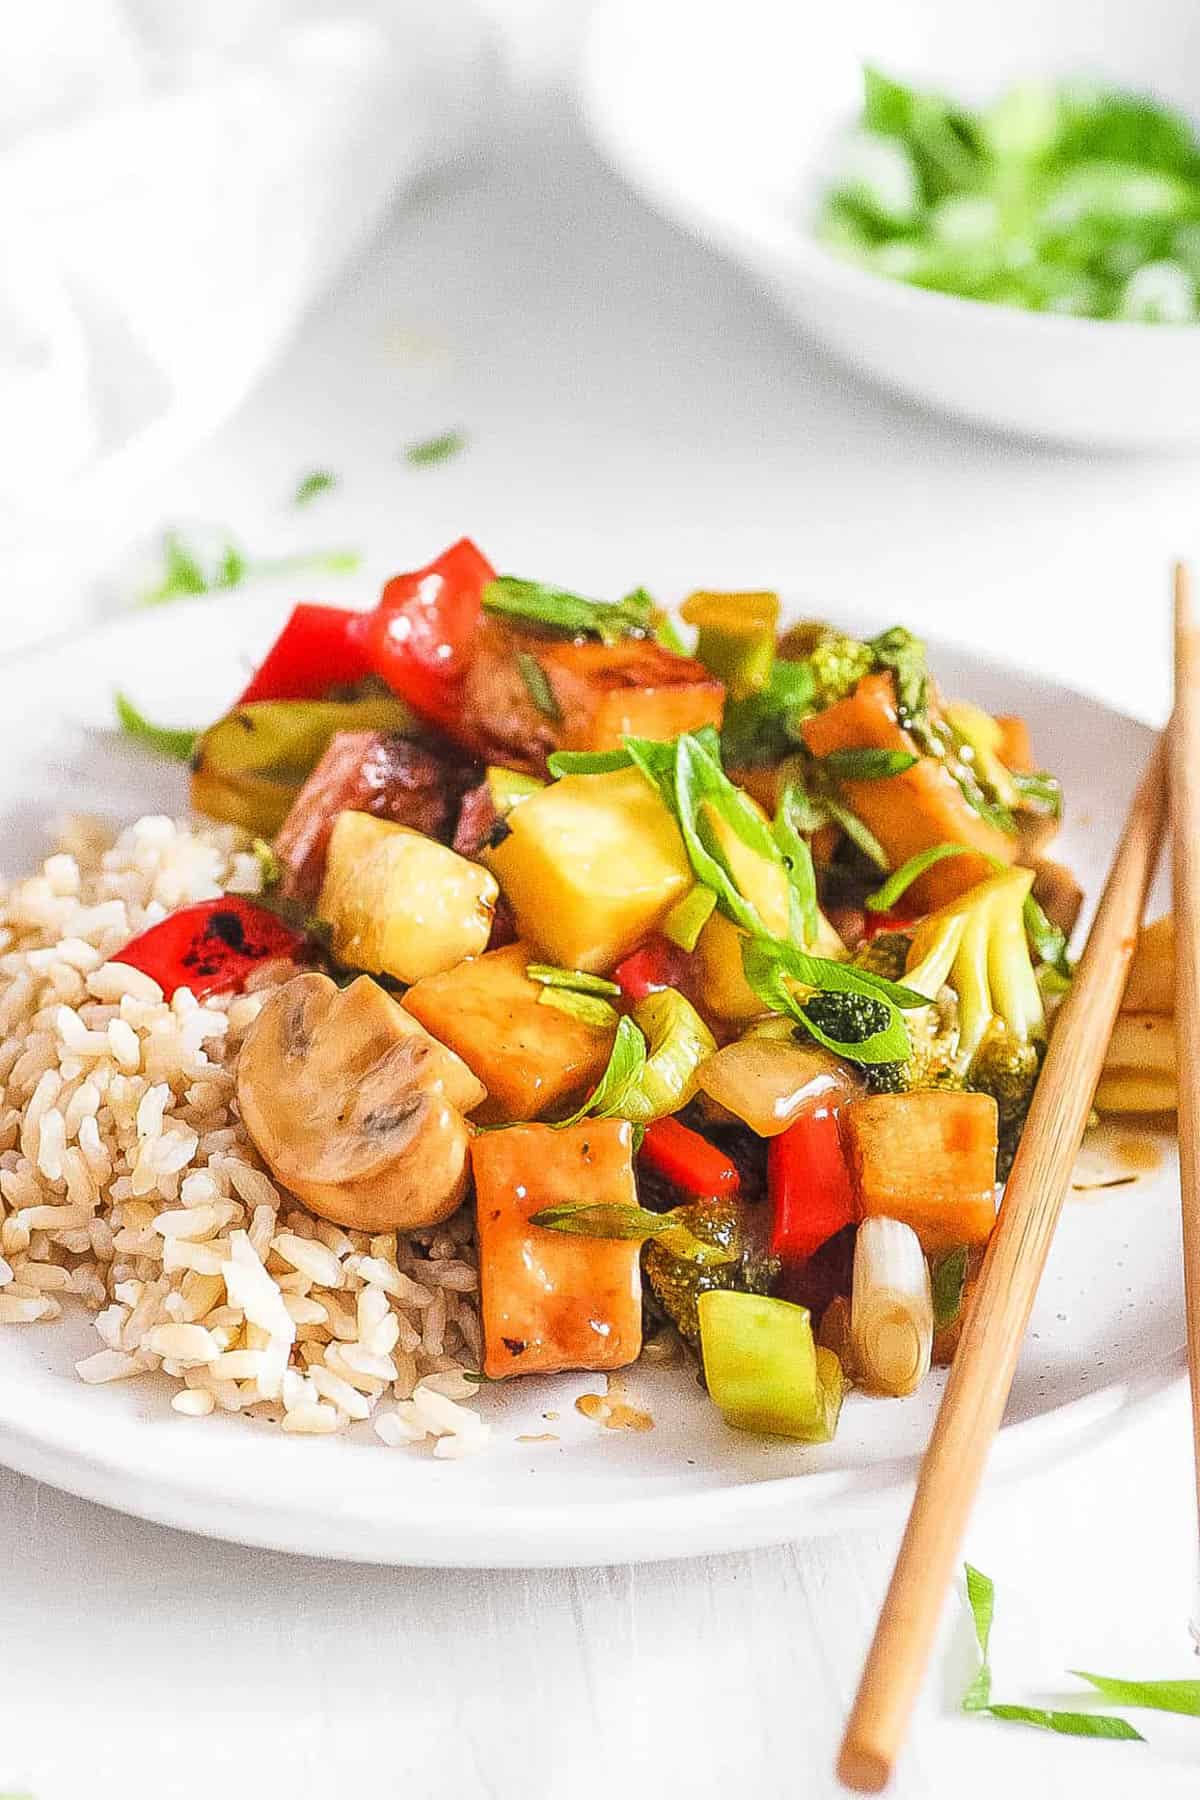 Sweet and sour tofu with veggies, served on a white plate with chopsticks.